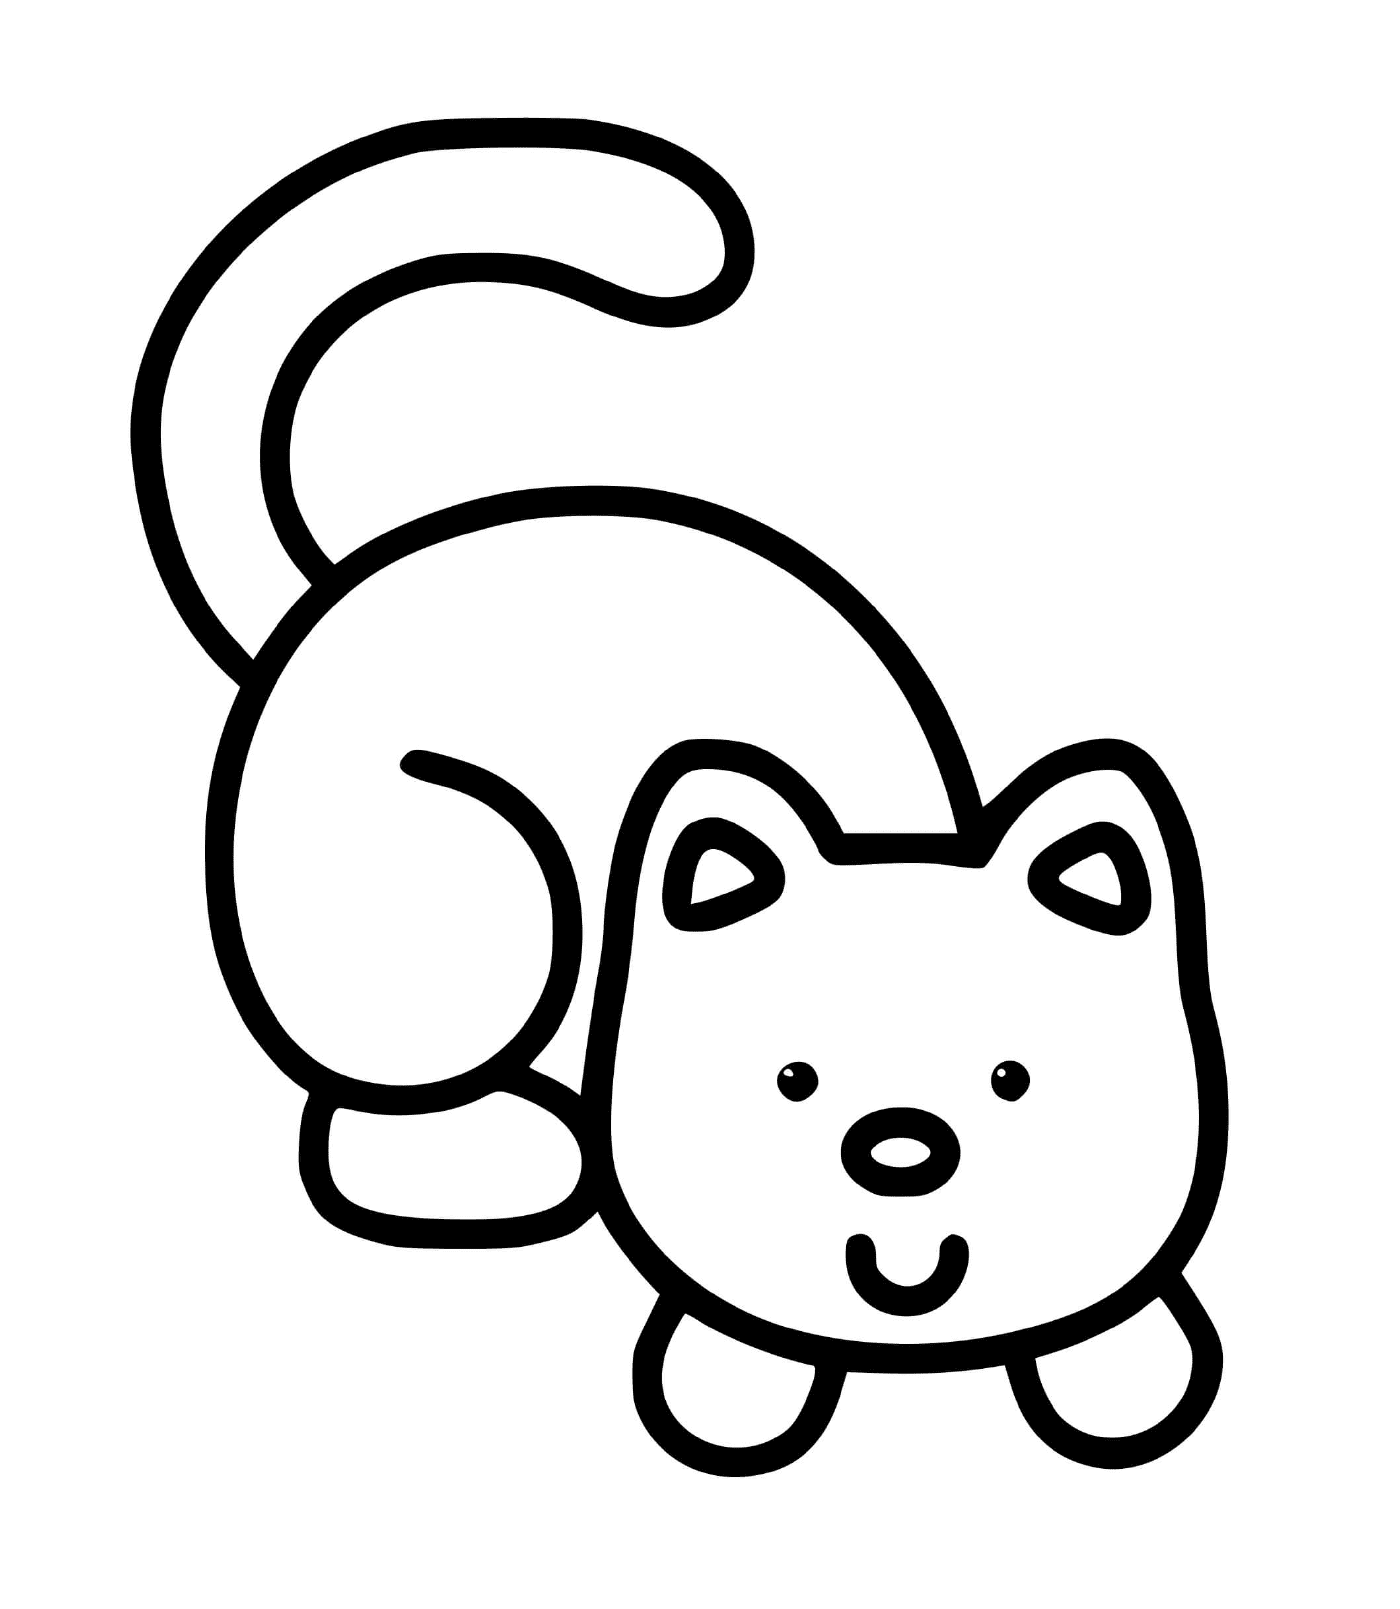  An easy to draw cat for 2-year-olds 